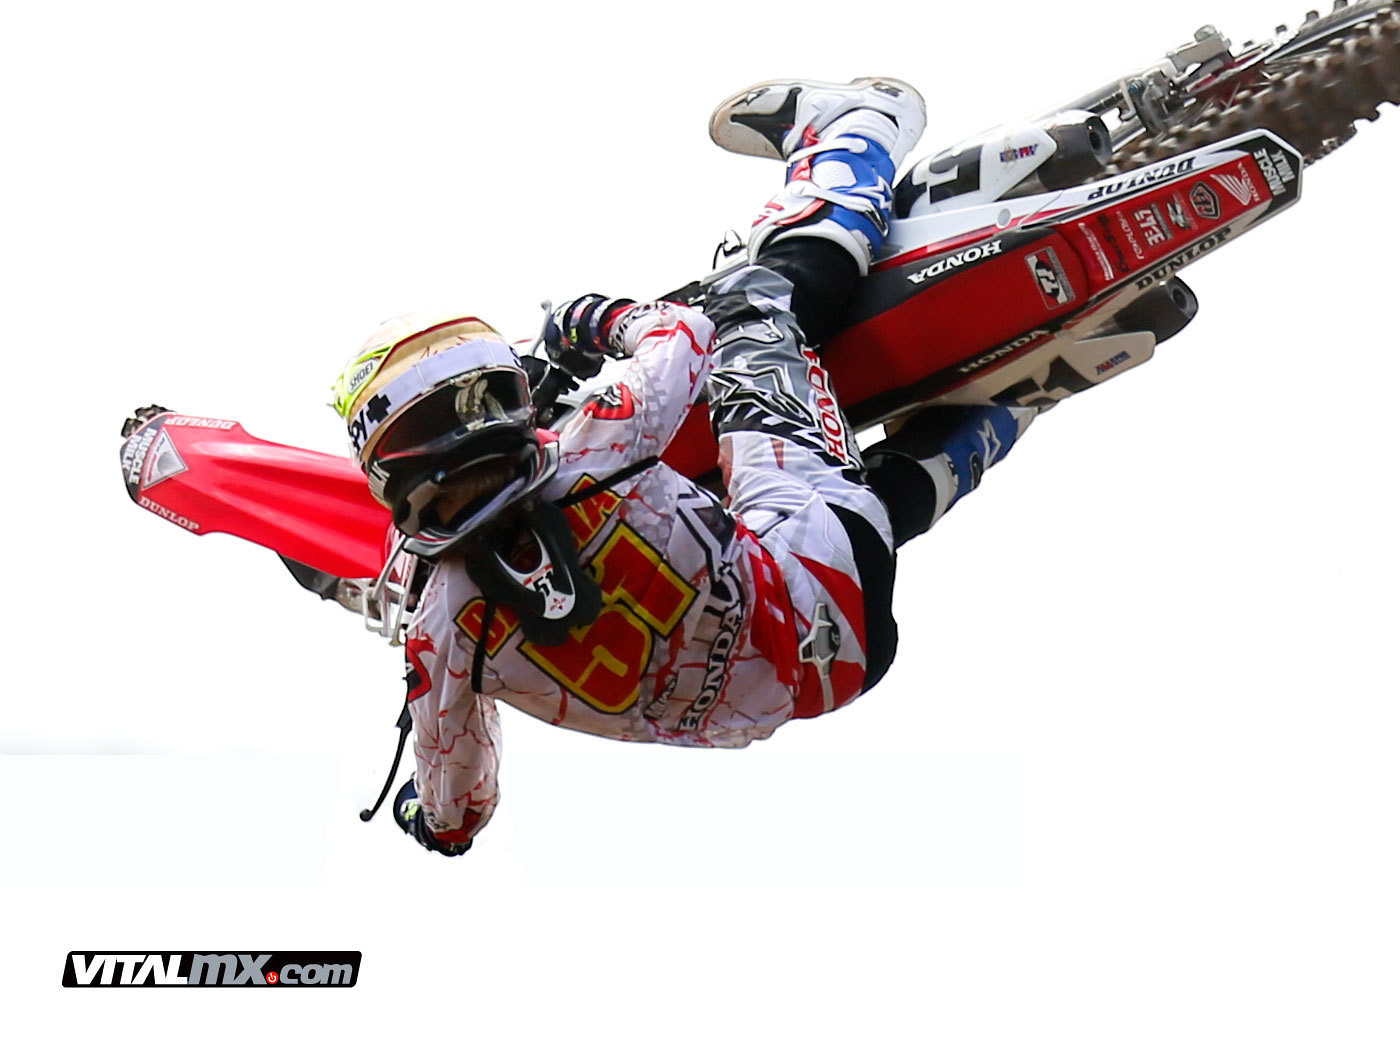 Barcia wallpaper anyone   Moto Related   Motocross Forums Message